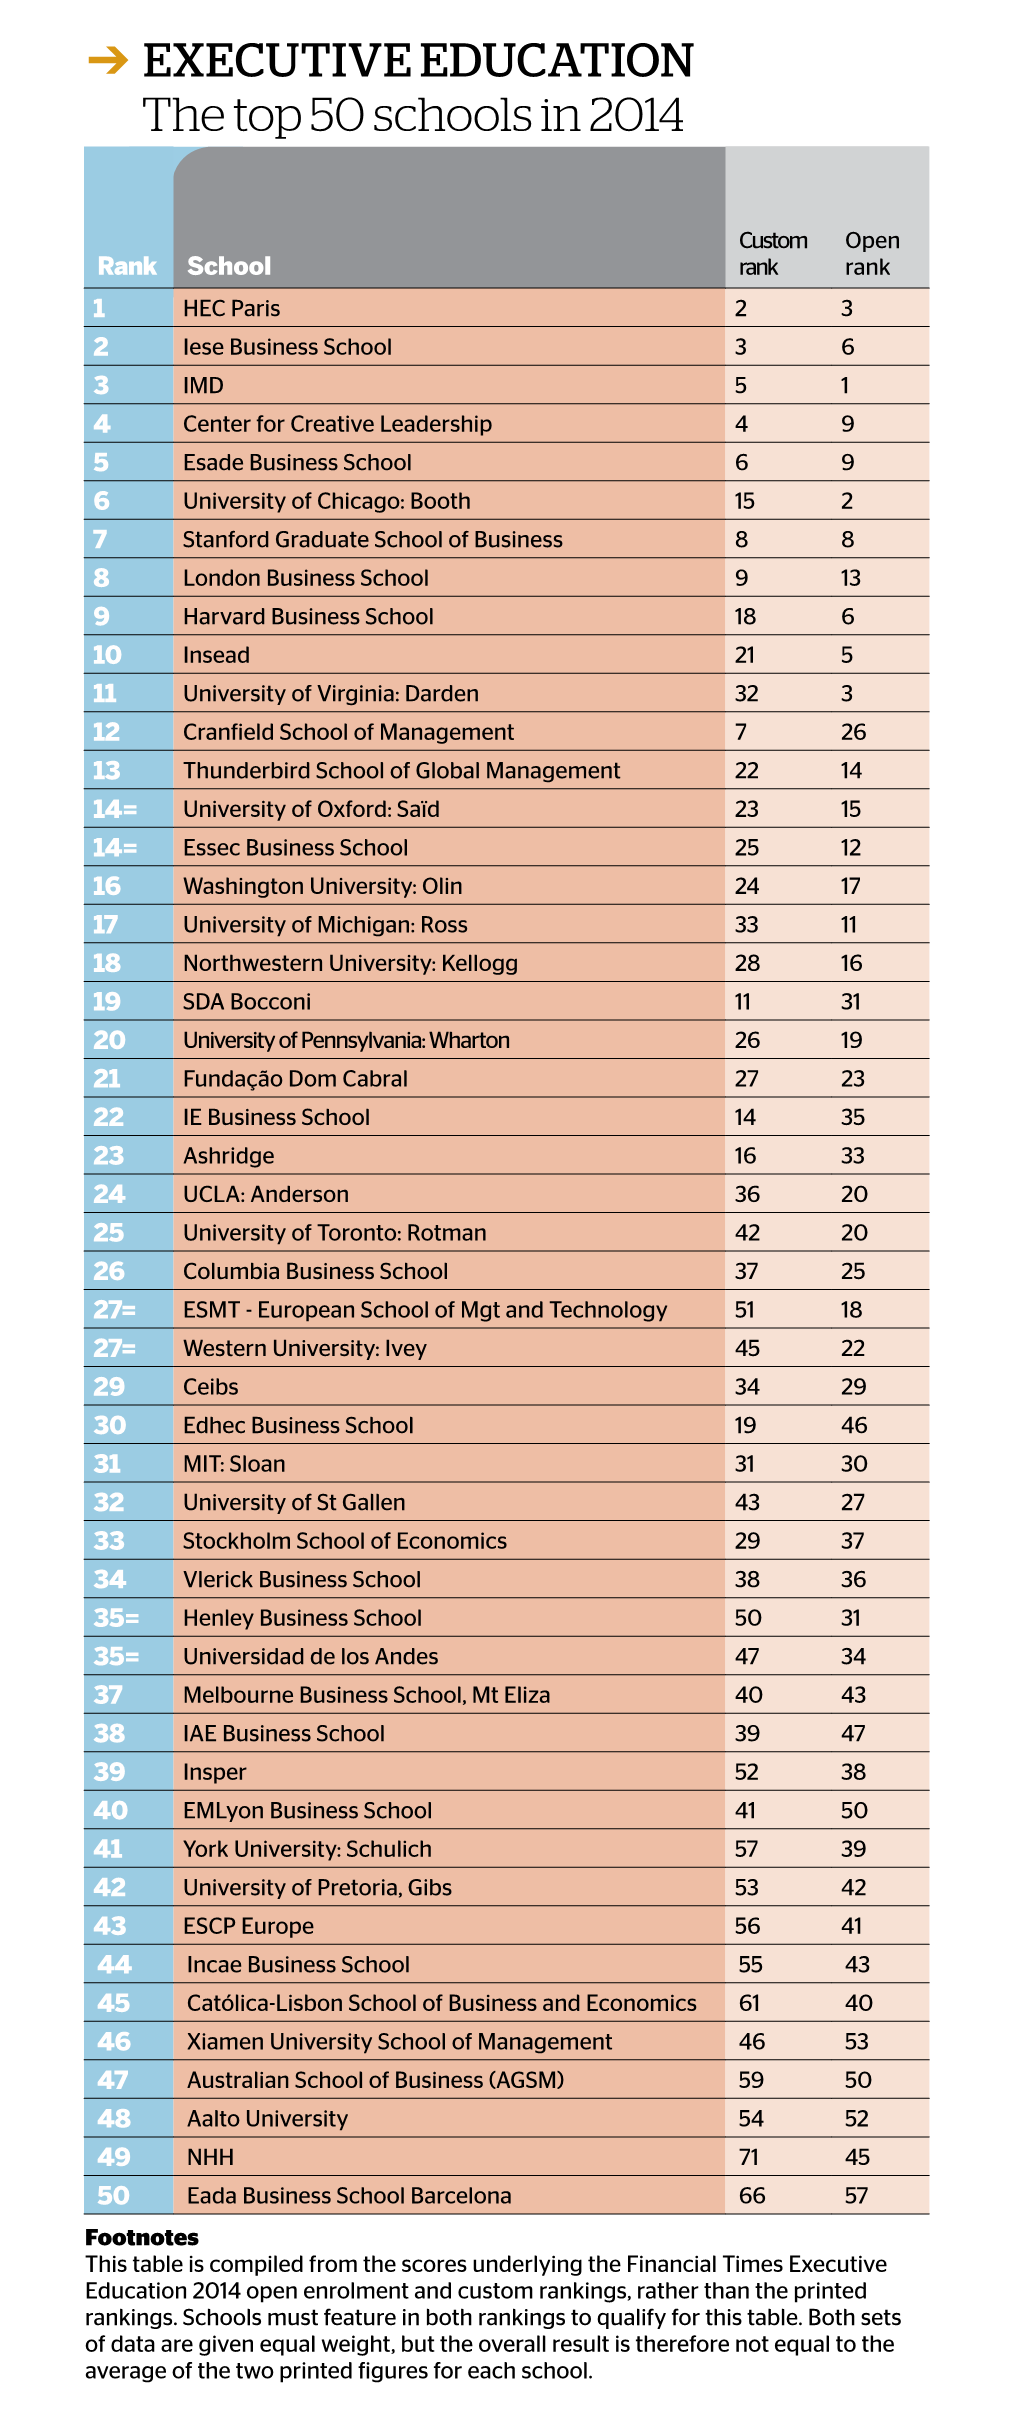 Executive Education the Top 50 Schools in 2014